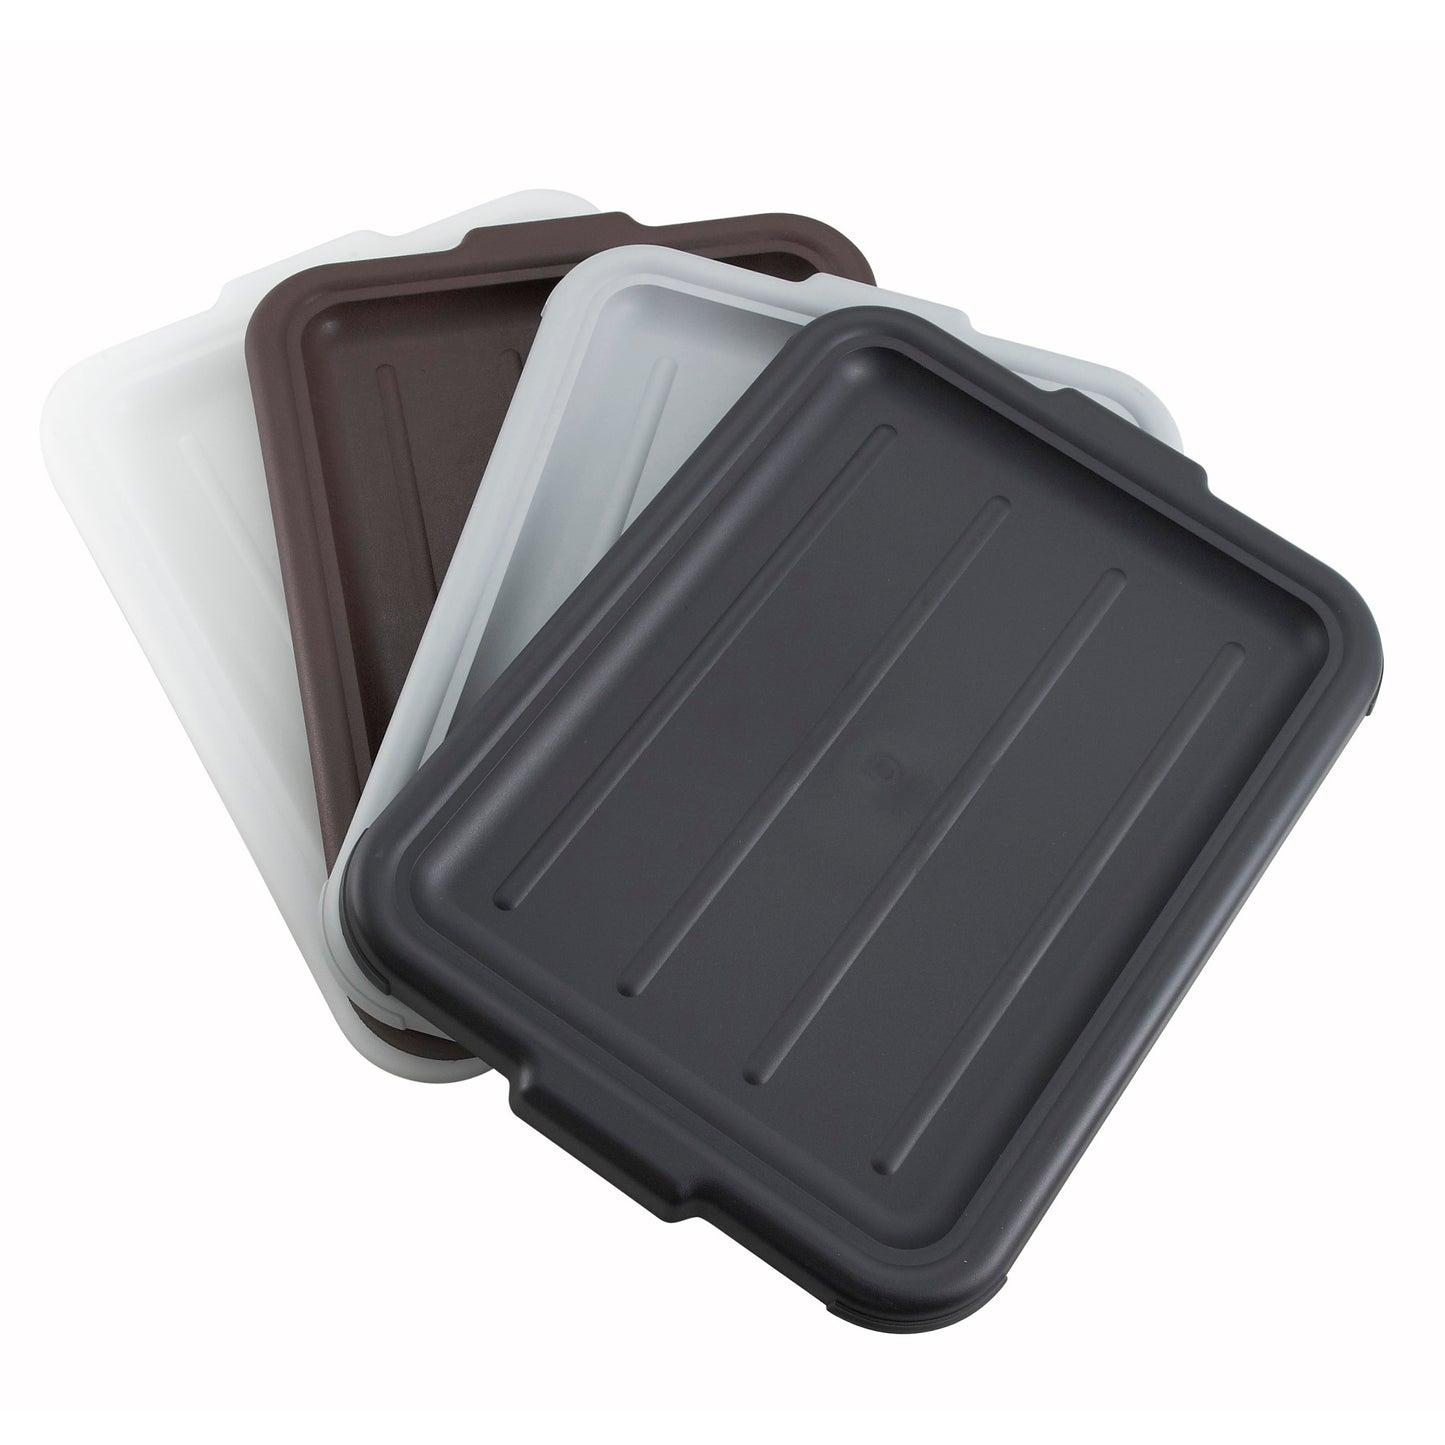 PL-57B - Cover for Standard Dish Boxes - Brown